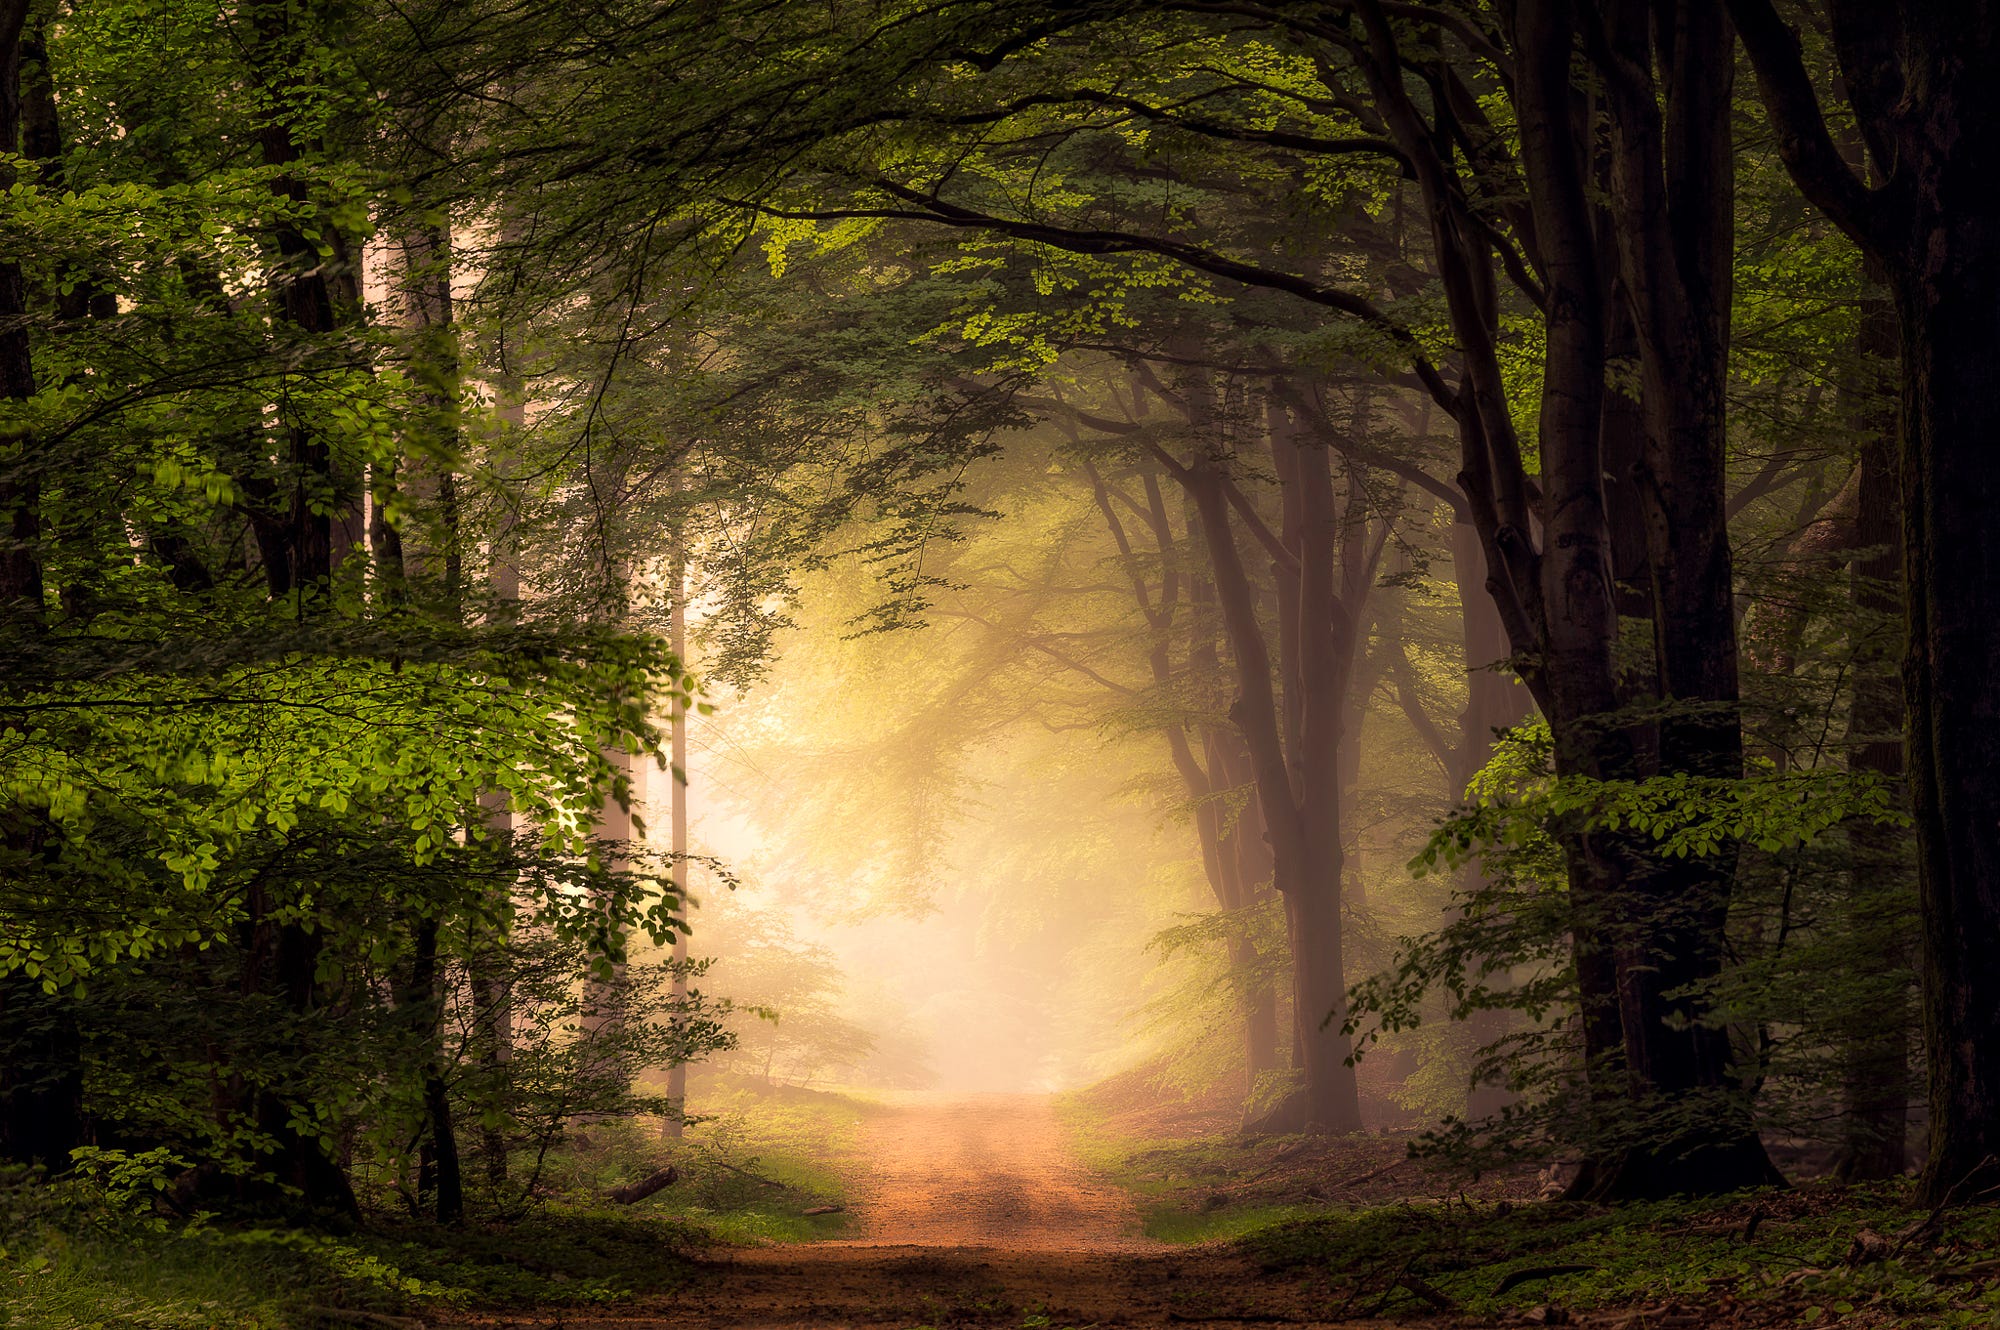 General 2000x1330 nature landscape trees path mist alone dirt road forest